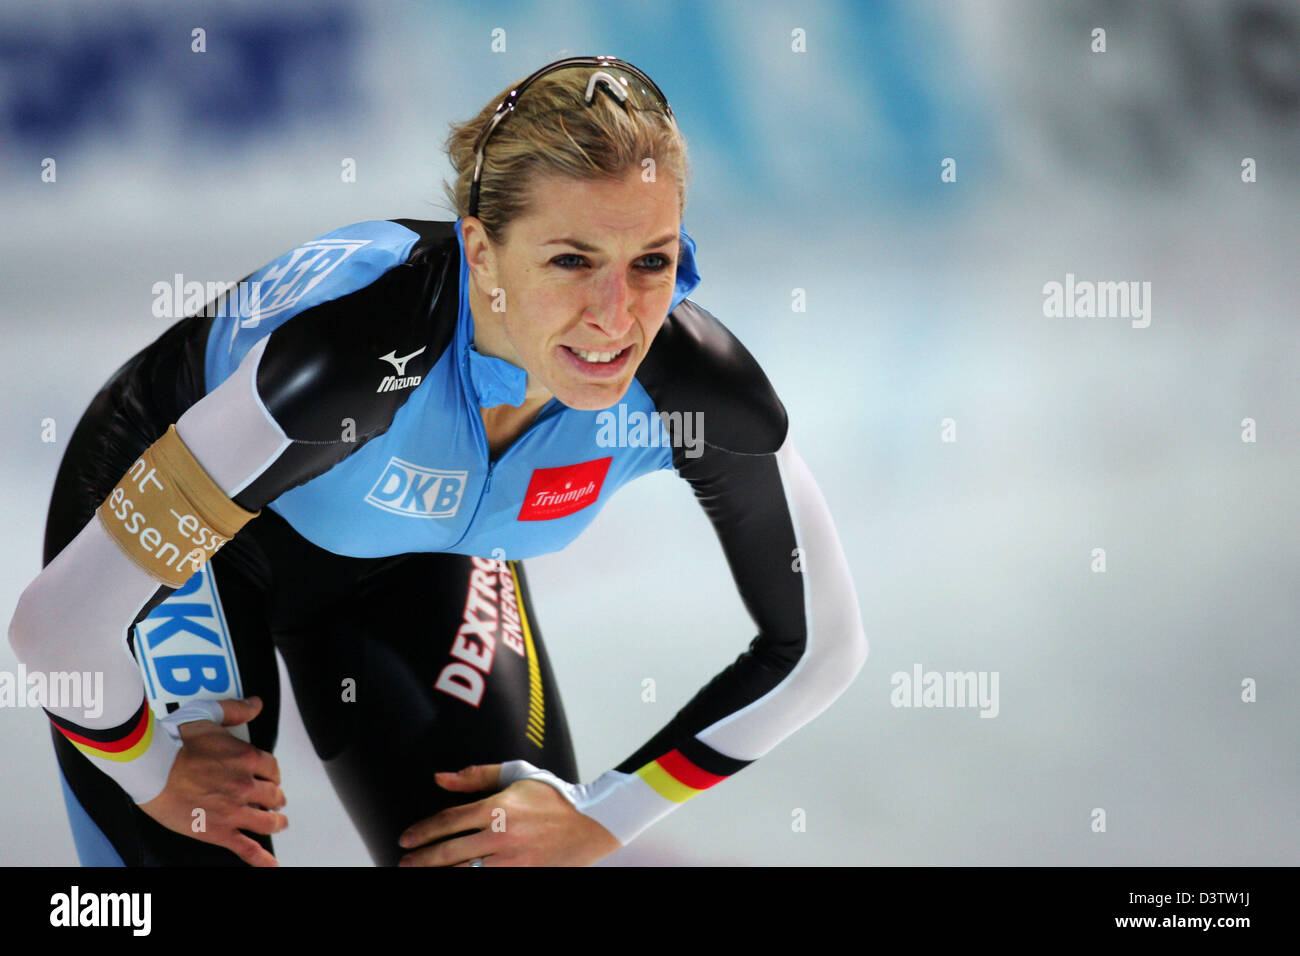 German speed skater Anni Friesinger is exhausted after winning the 1,500 metres of the speed skating world cup in Berlin, Germany, Friday 17 November 2006. Photo: Gero Breloer Stock Photo